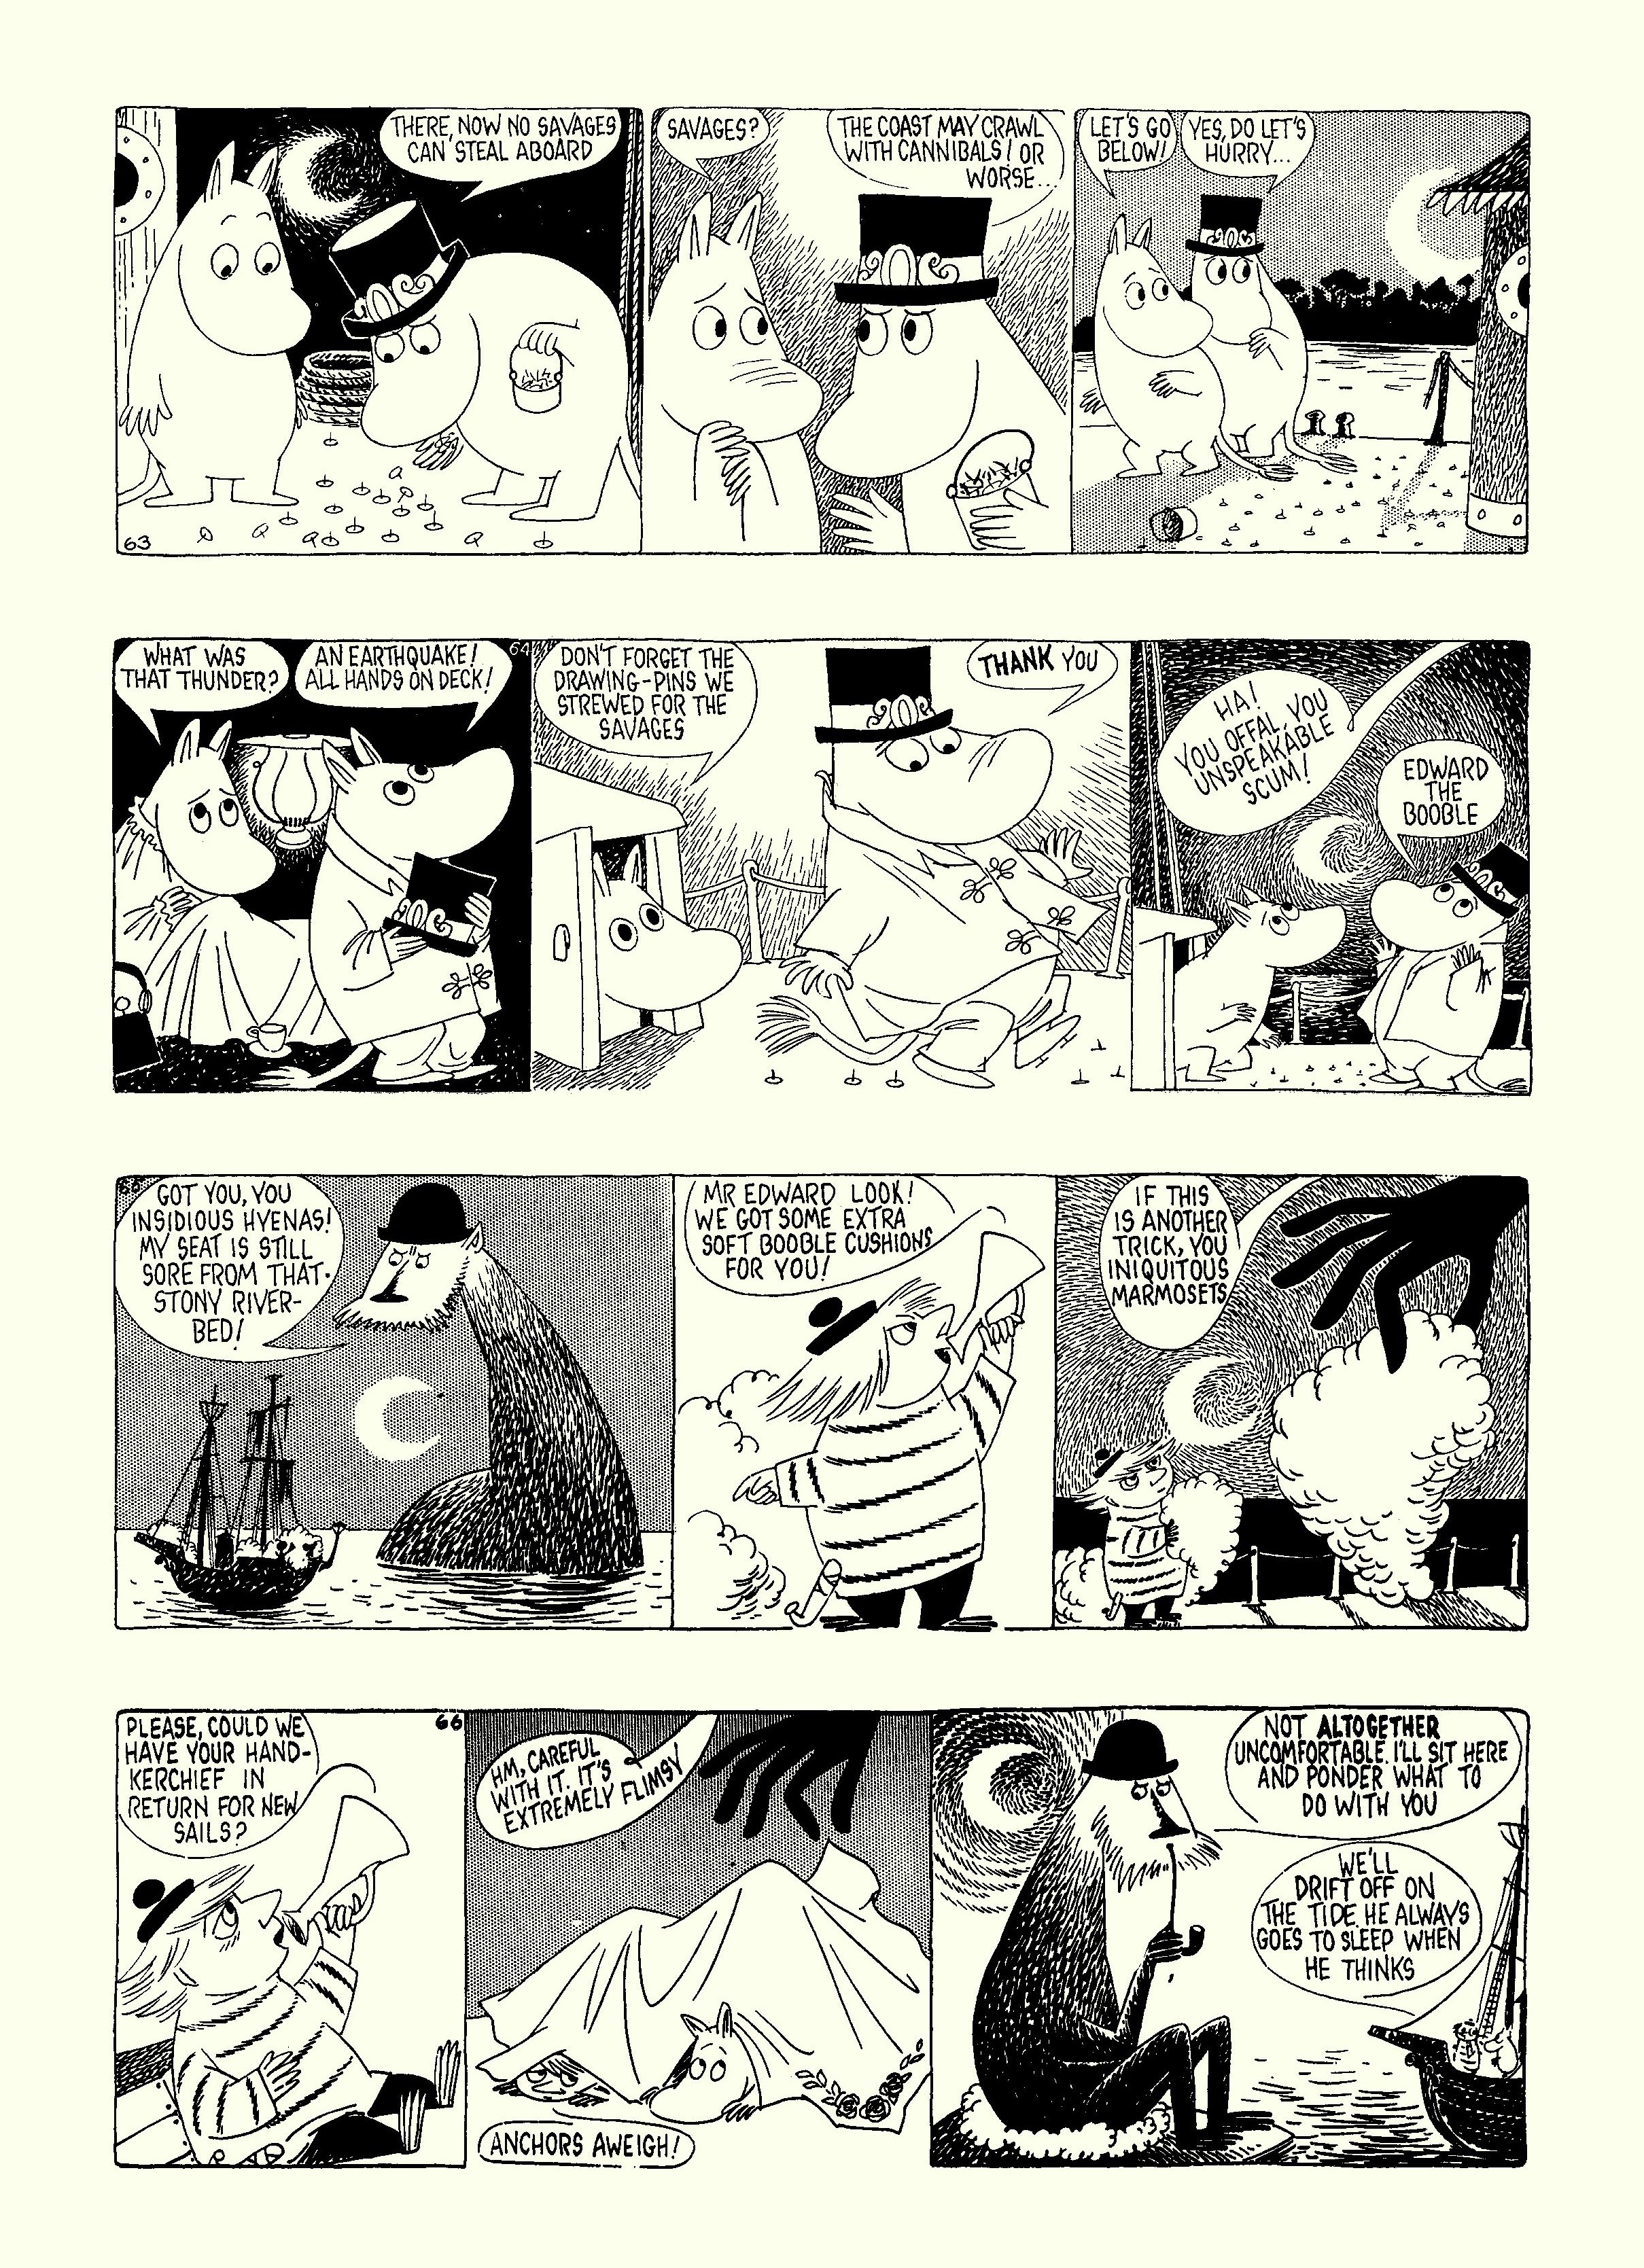 Read online Moomin: The Complete Tove Jansson Comic Strip comic -  Issue # TPB 5 - 47